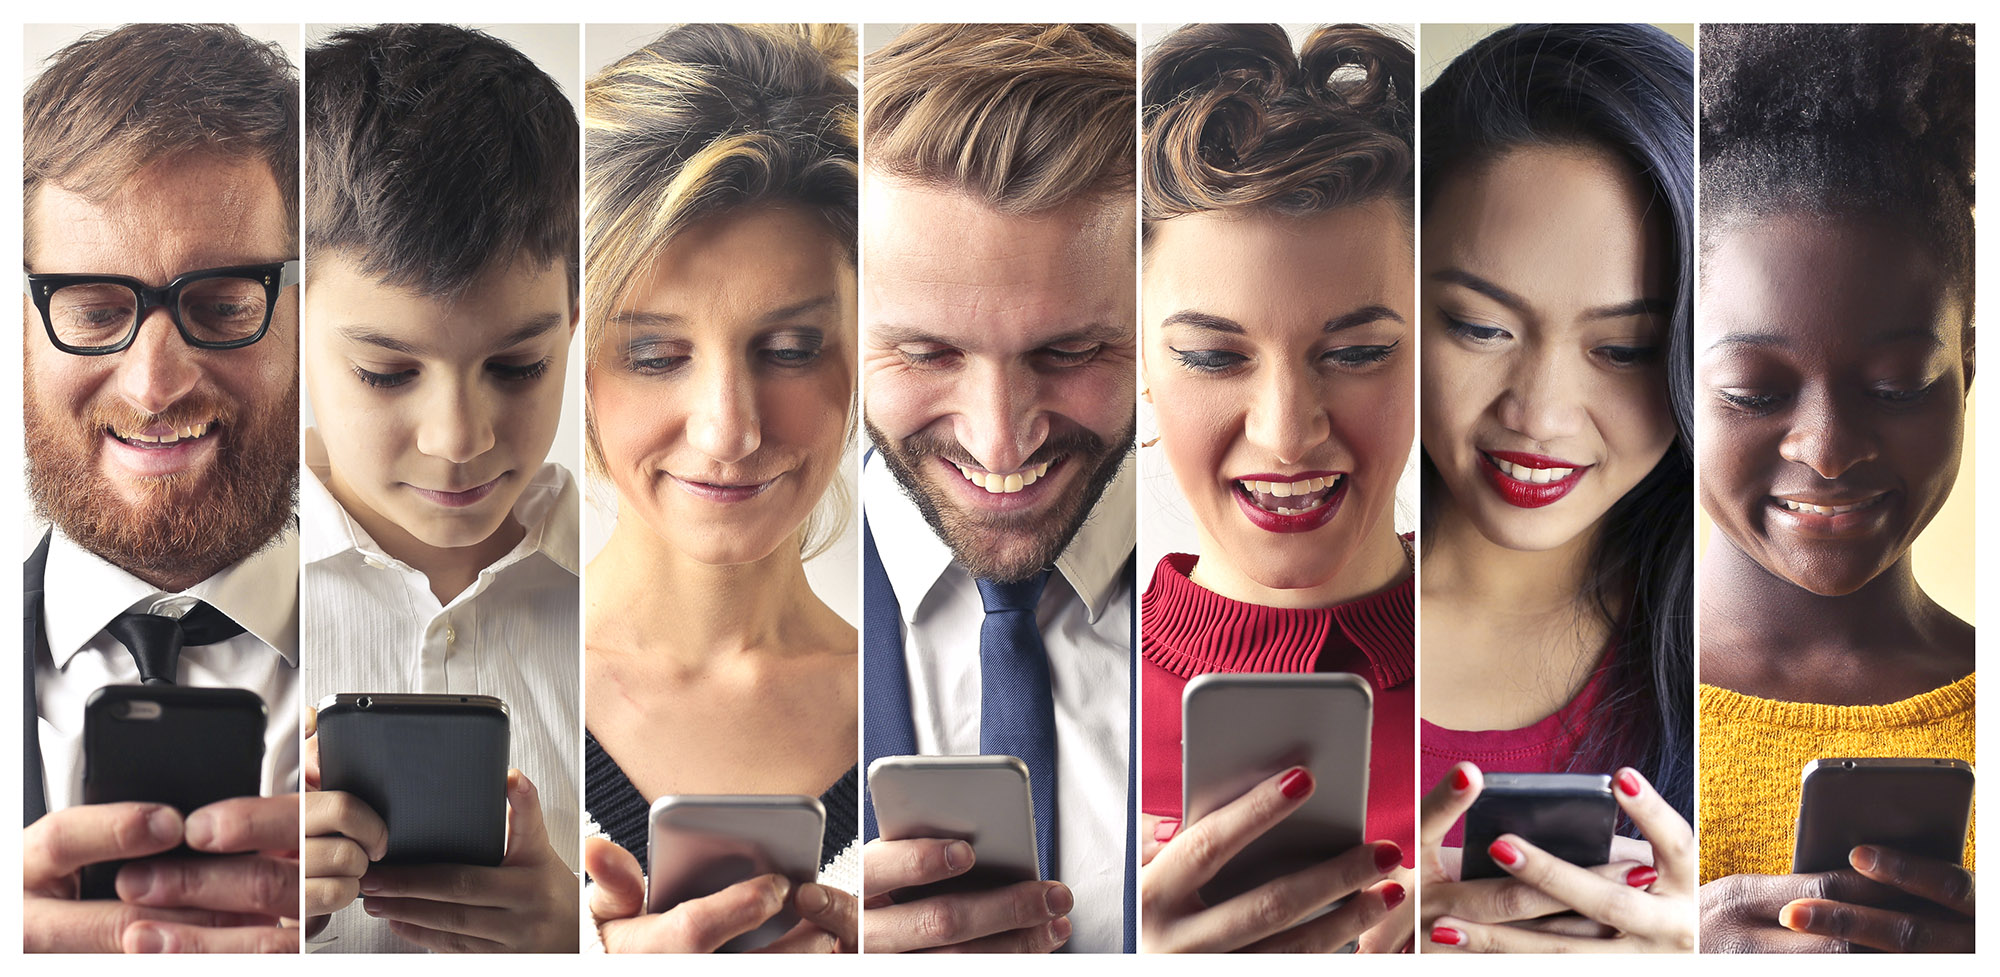 The Mobile Imperative: Why Mobile Optimization Matters